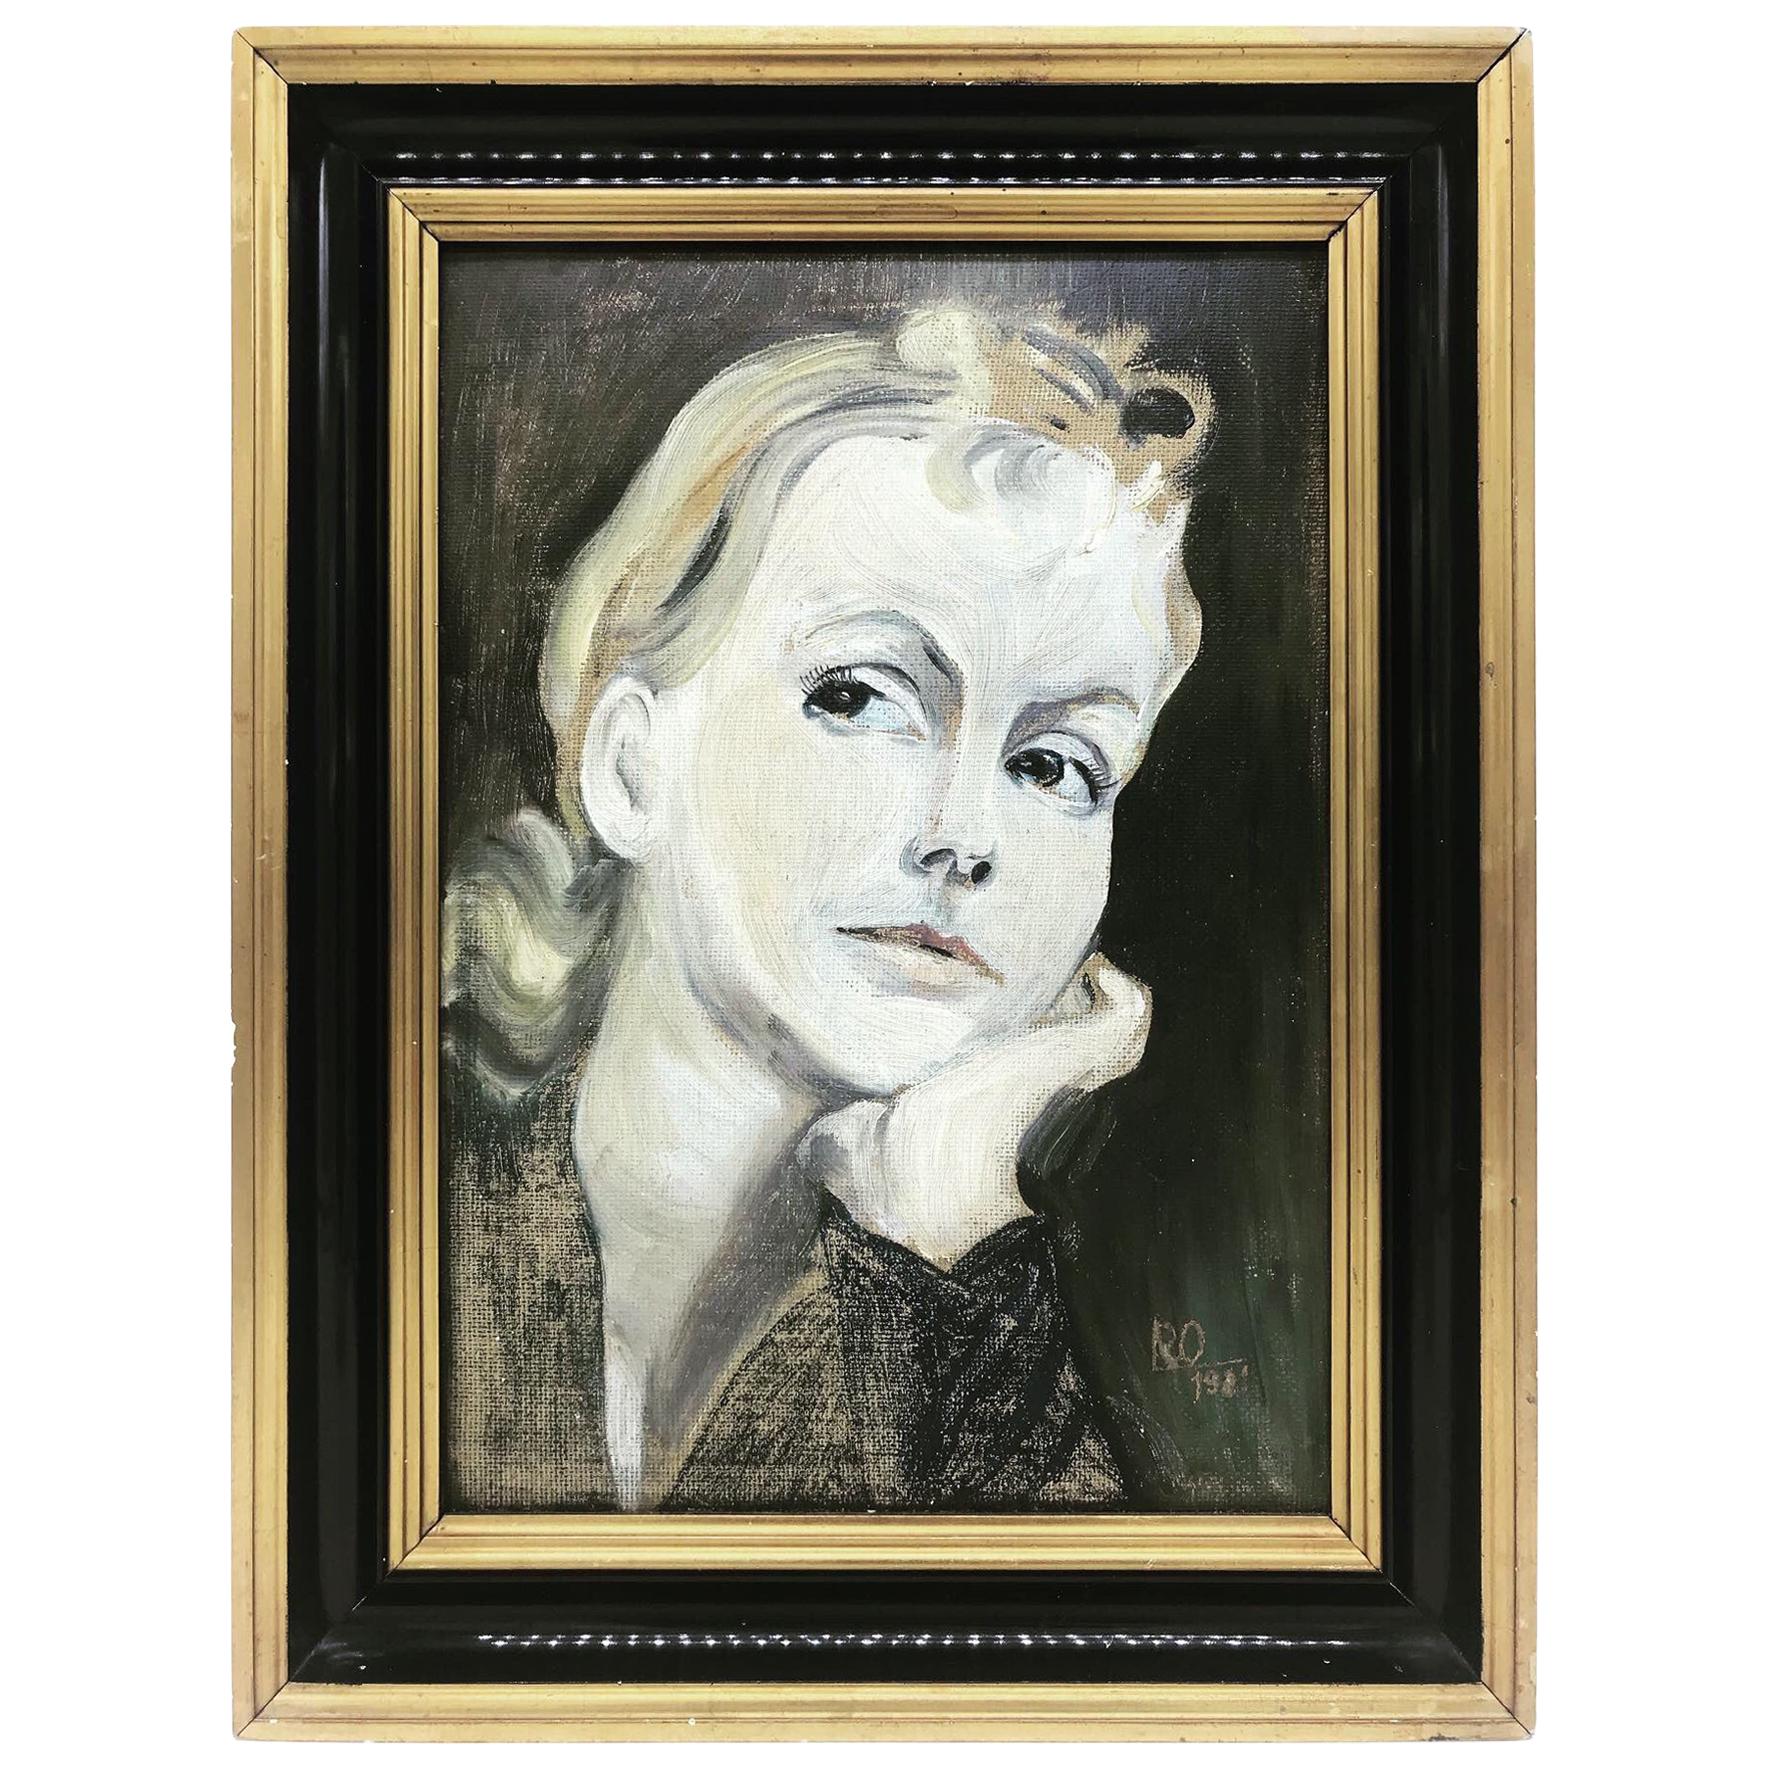 Greta Garbo Oil on Board by an Unknown Artist Dated 1931 and Signed RO